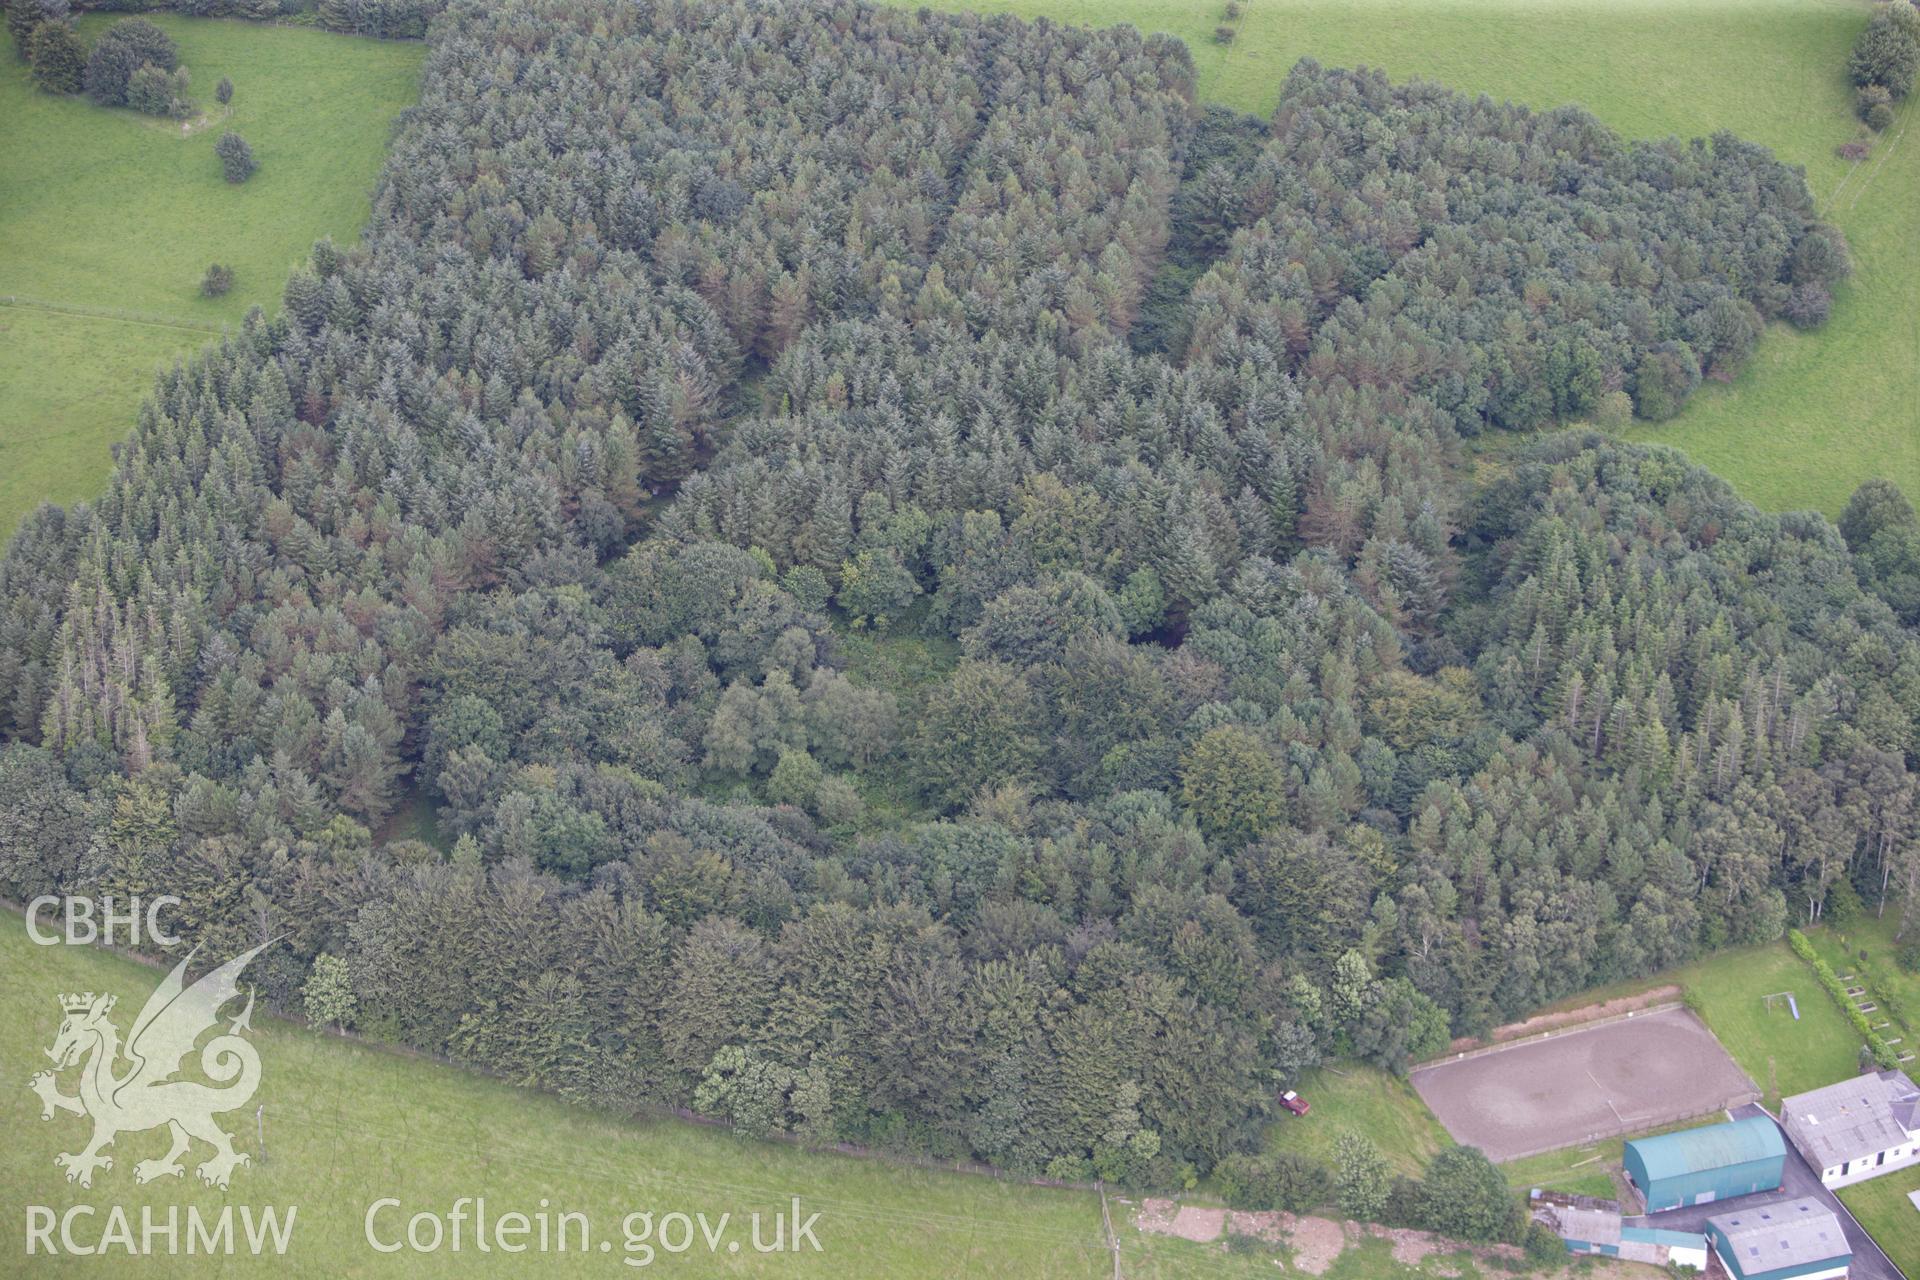 RCAHMW colour oblique aerial photograph of Bwrdd-y-Rhyfel Enclosure. Taken on 30 July 2009 by Toby Driver